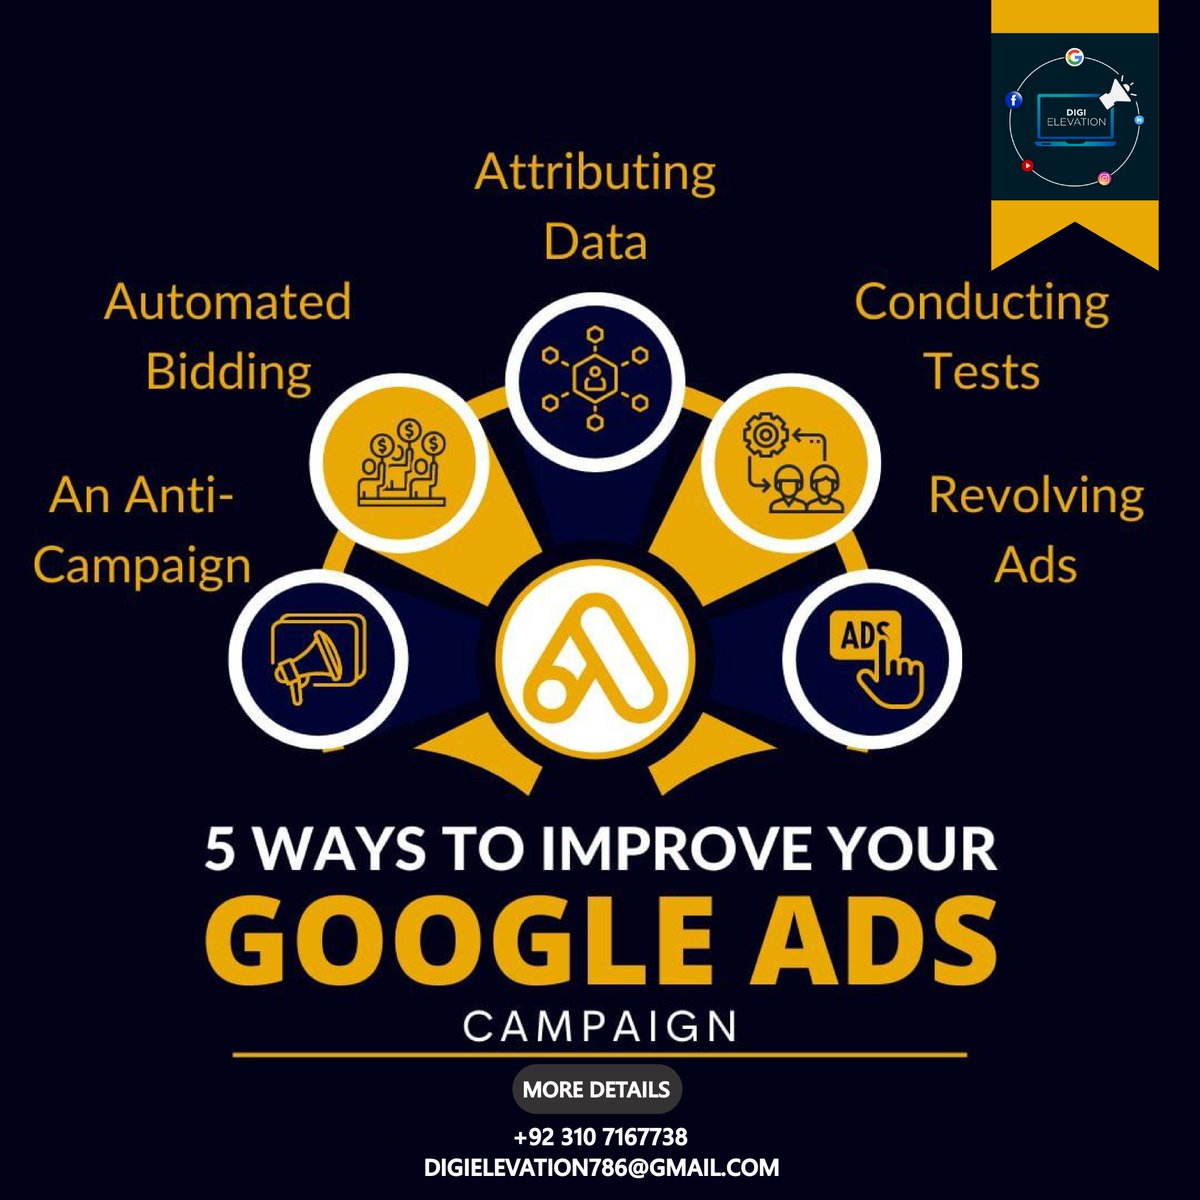 A Google Ads campaign is a worthwhile investment due to its ability to reach virtually unlimited, targeted audiences at a relatively low cost
#googleads #googlepixel #googlereview #googleadwords #facebookmarket #googlemarketing #SEO #Youtube #googleadwords #searchenginemarketing